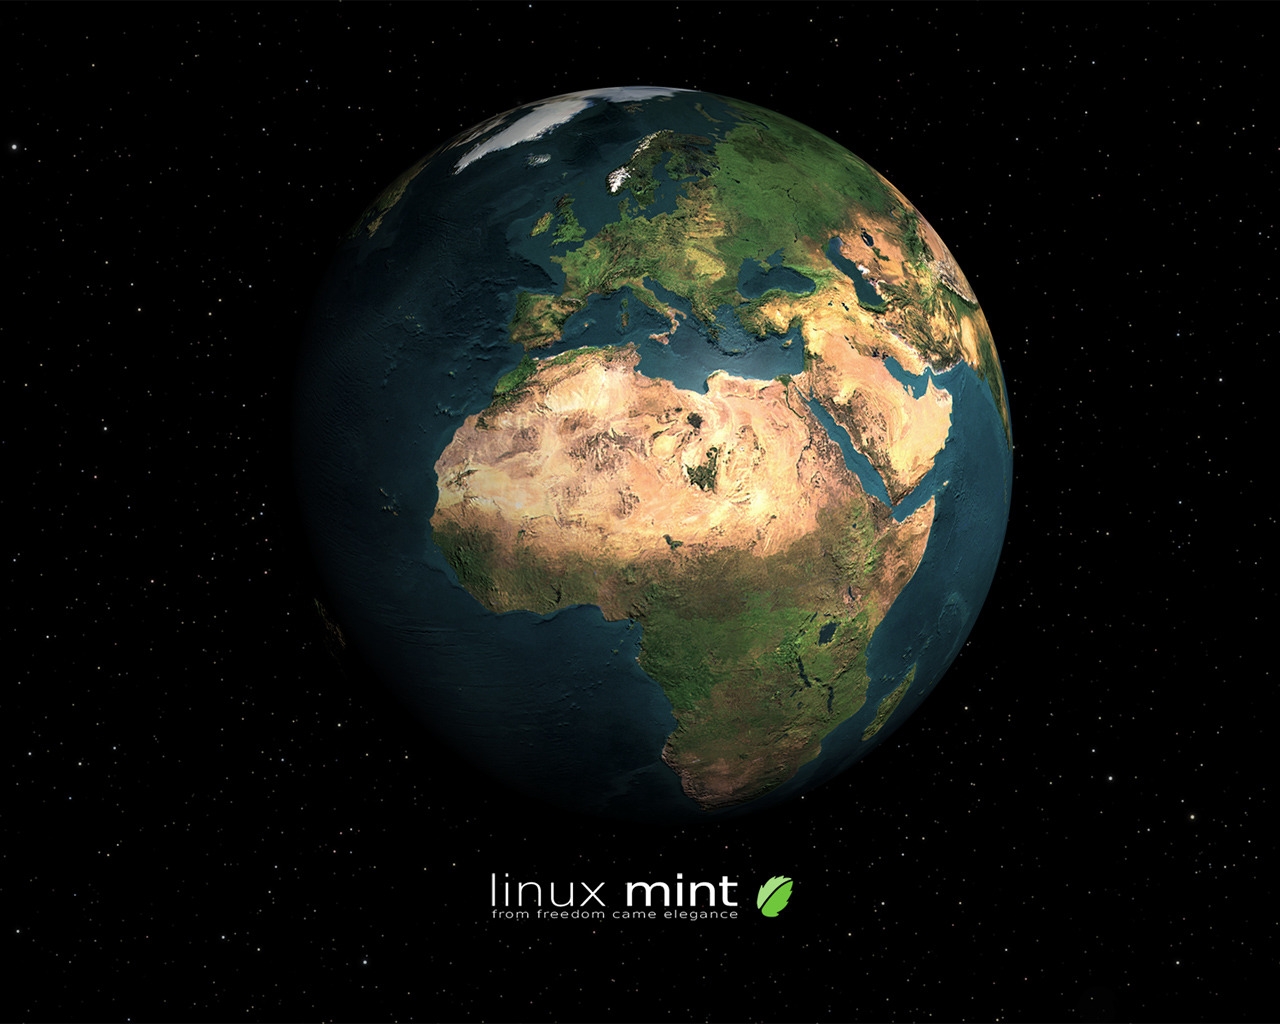 Linux Mint Earth for 1280 x 1024 resolution